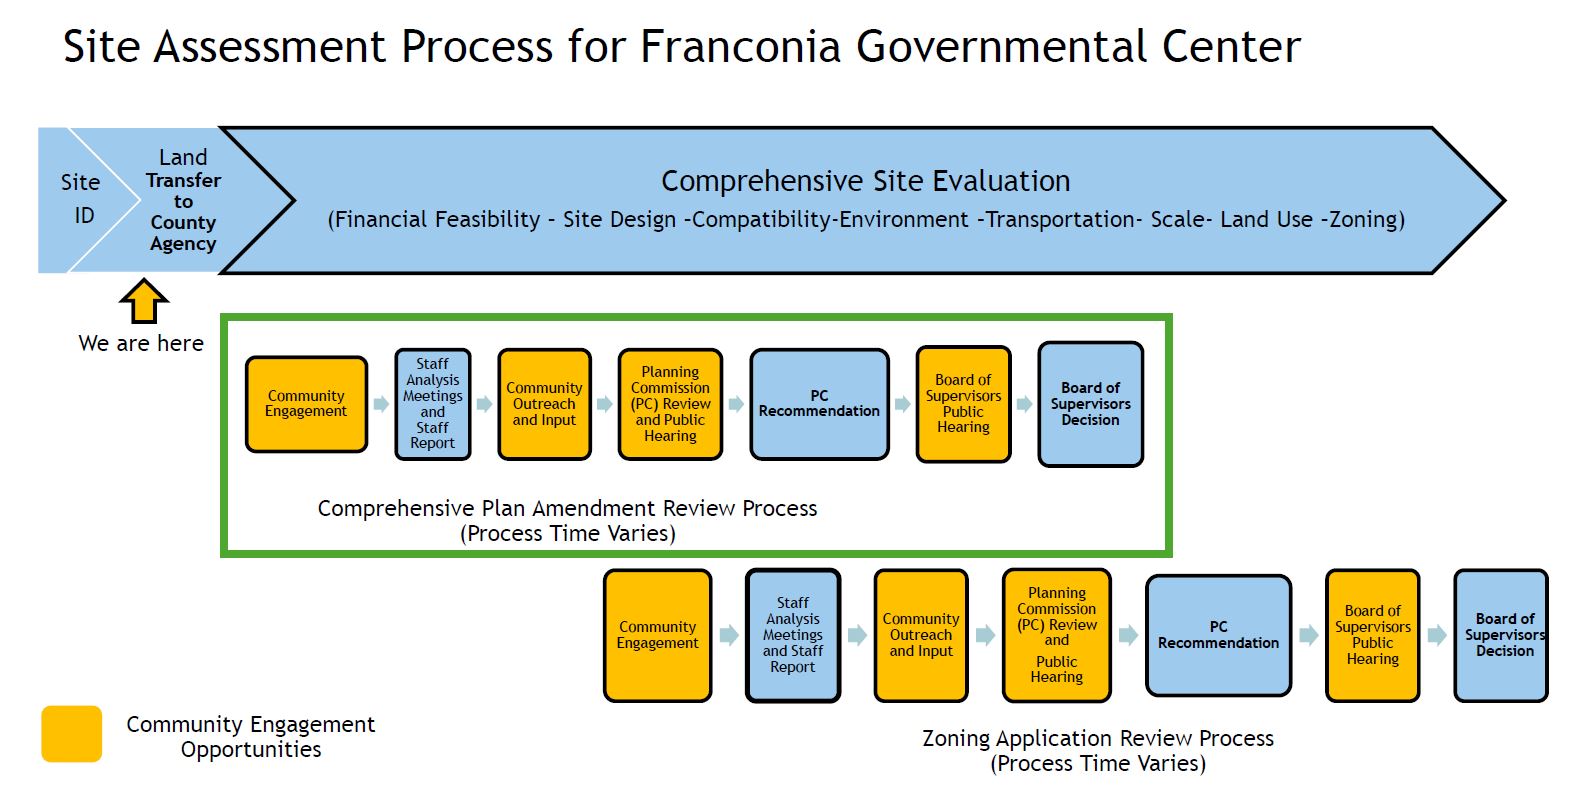 Graphic that shows the Site Assessment Process for the Franconia Governmental Center